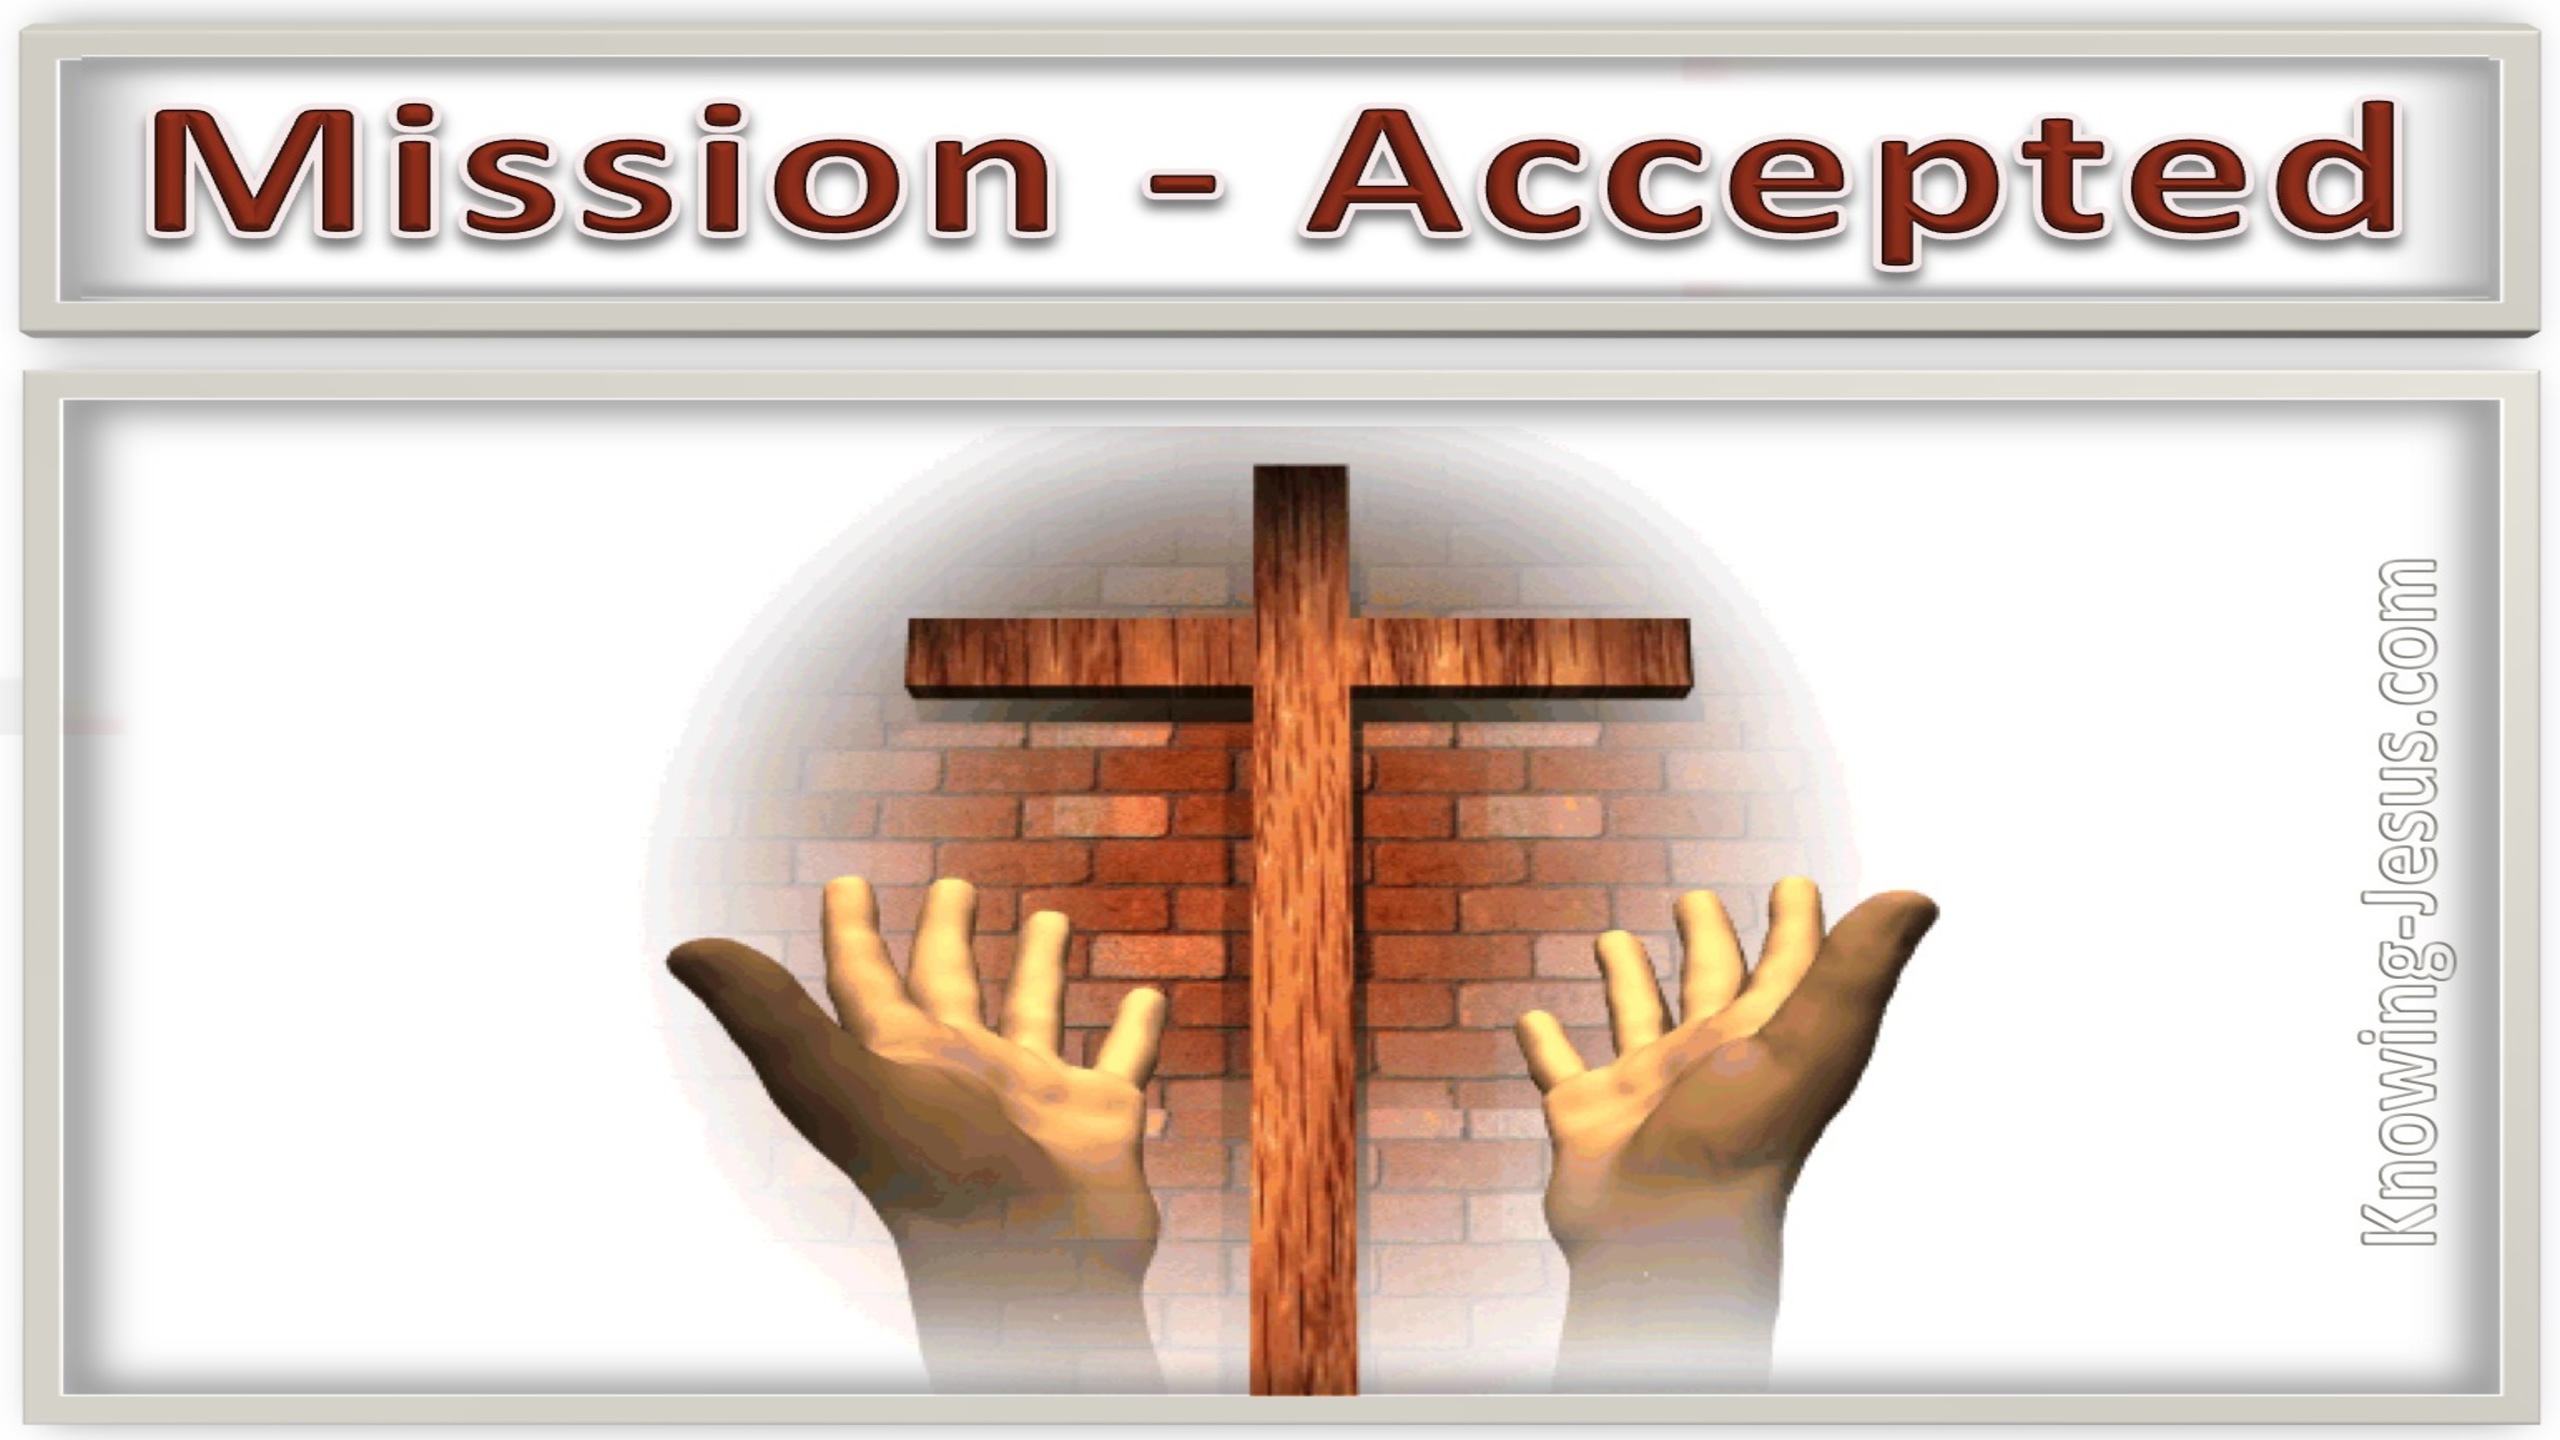 Mission Accepted (devotional)08-03 (white)